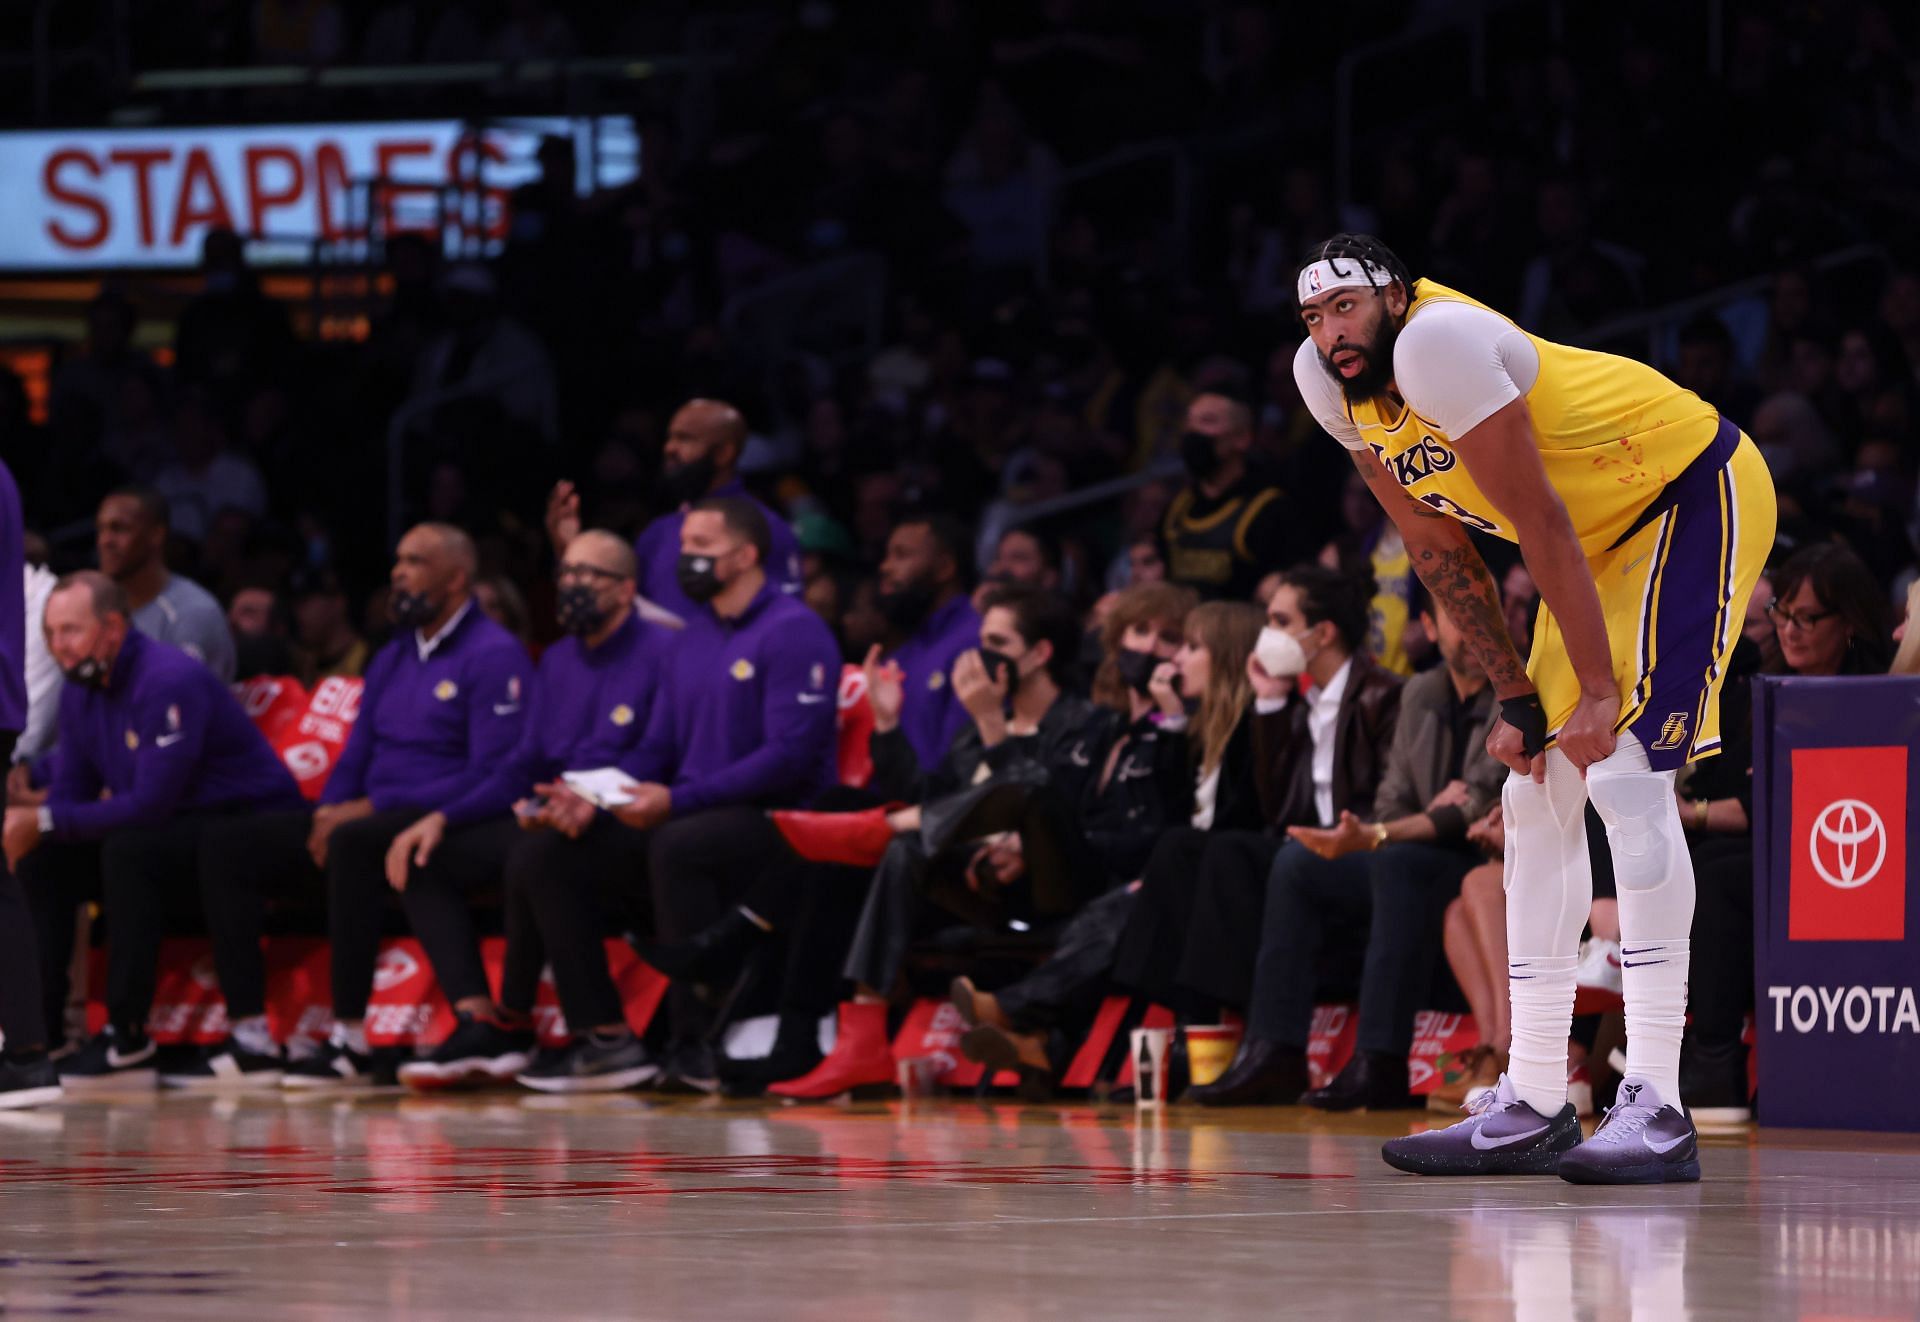 Anthony Davis will have to step up if the Lakers are to reach the promised land